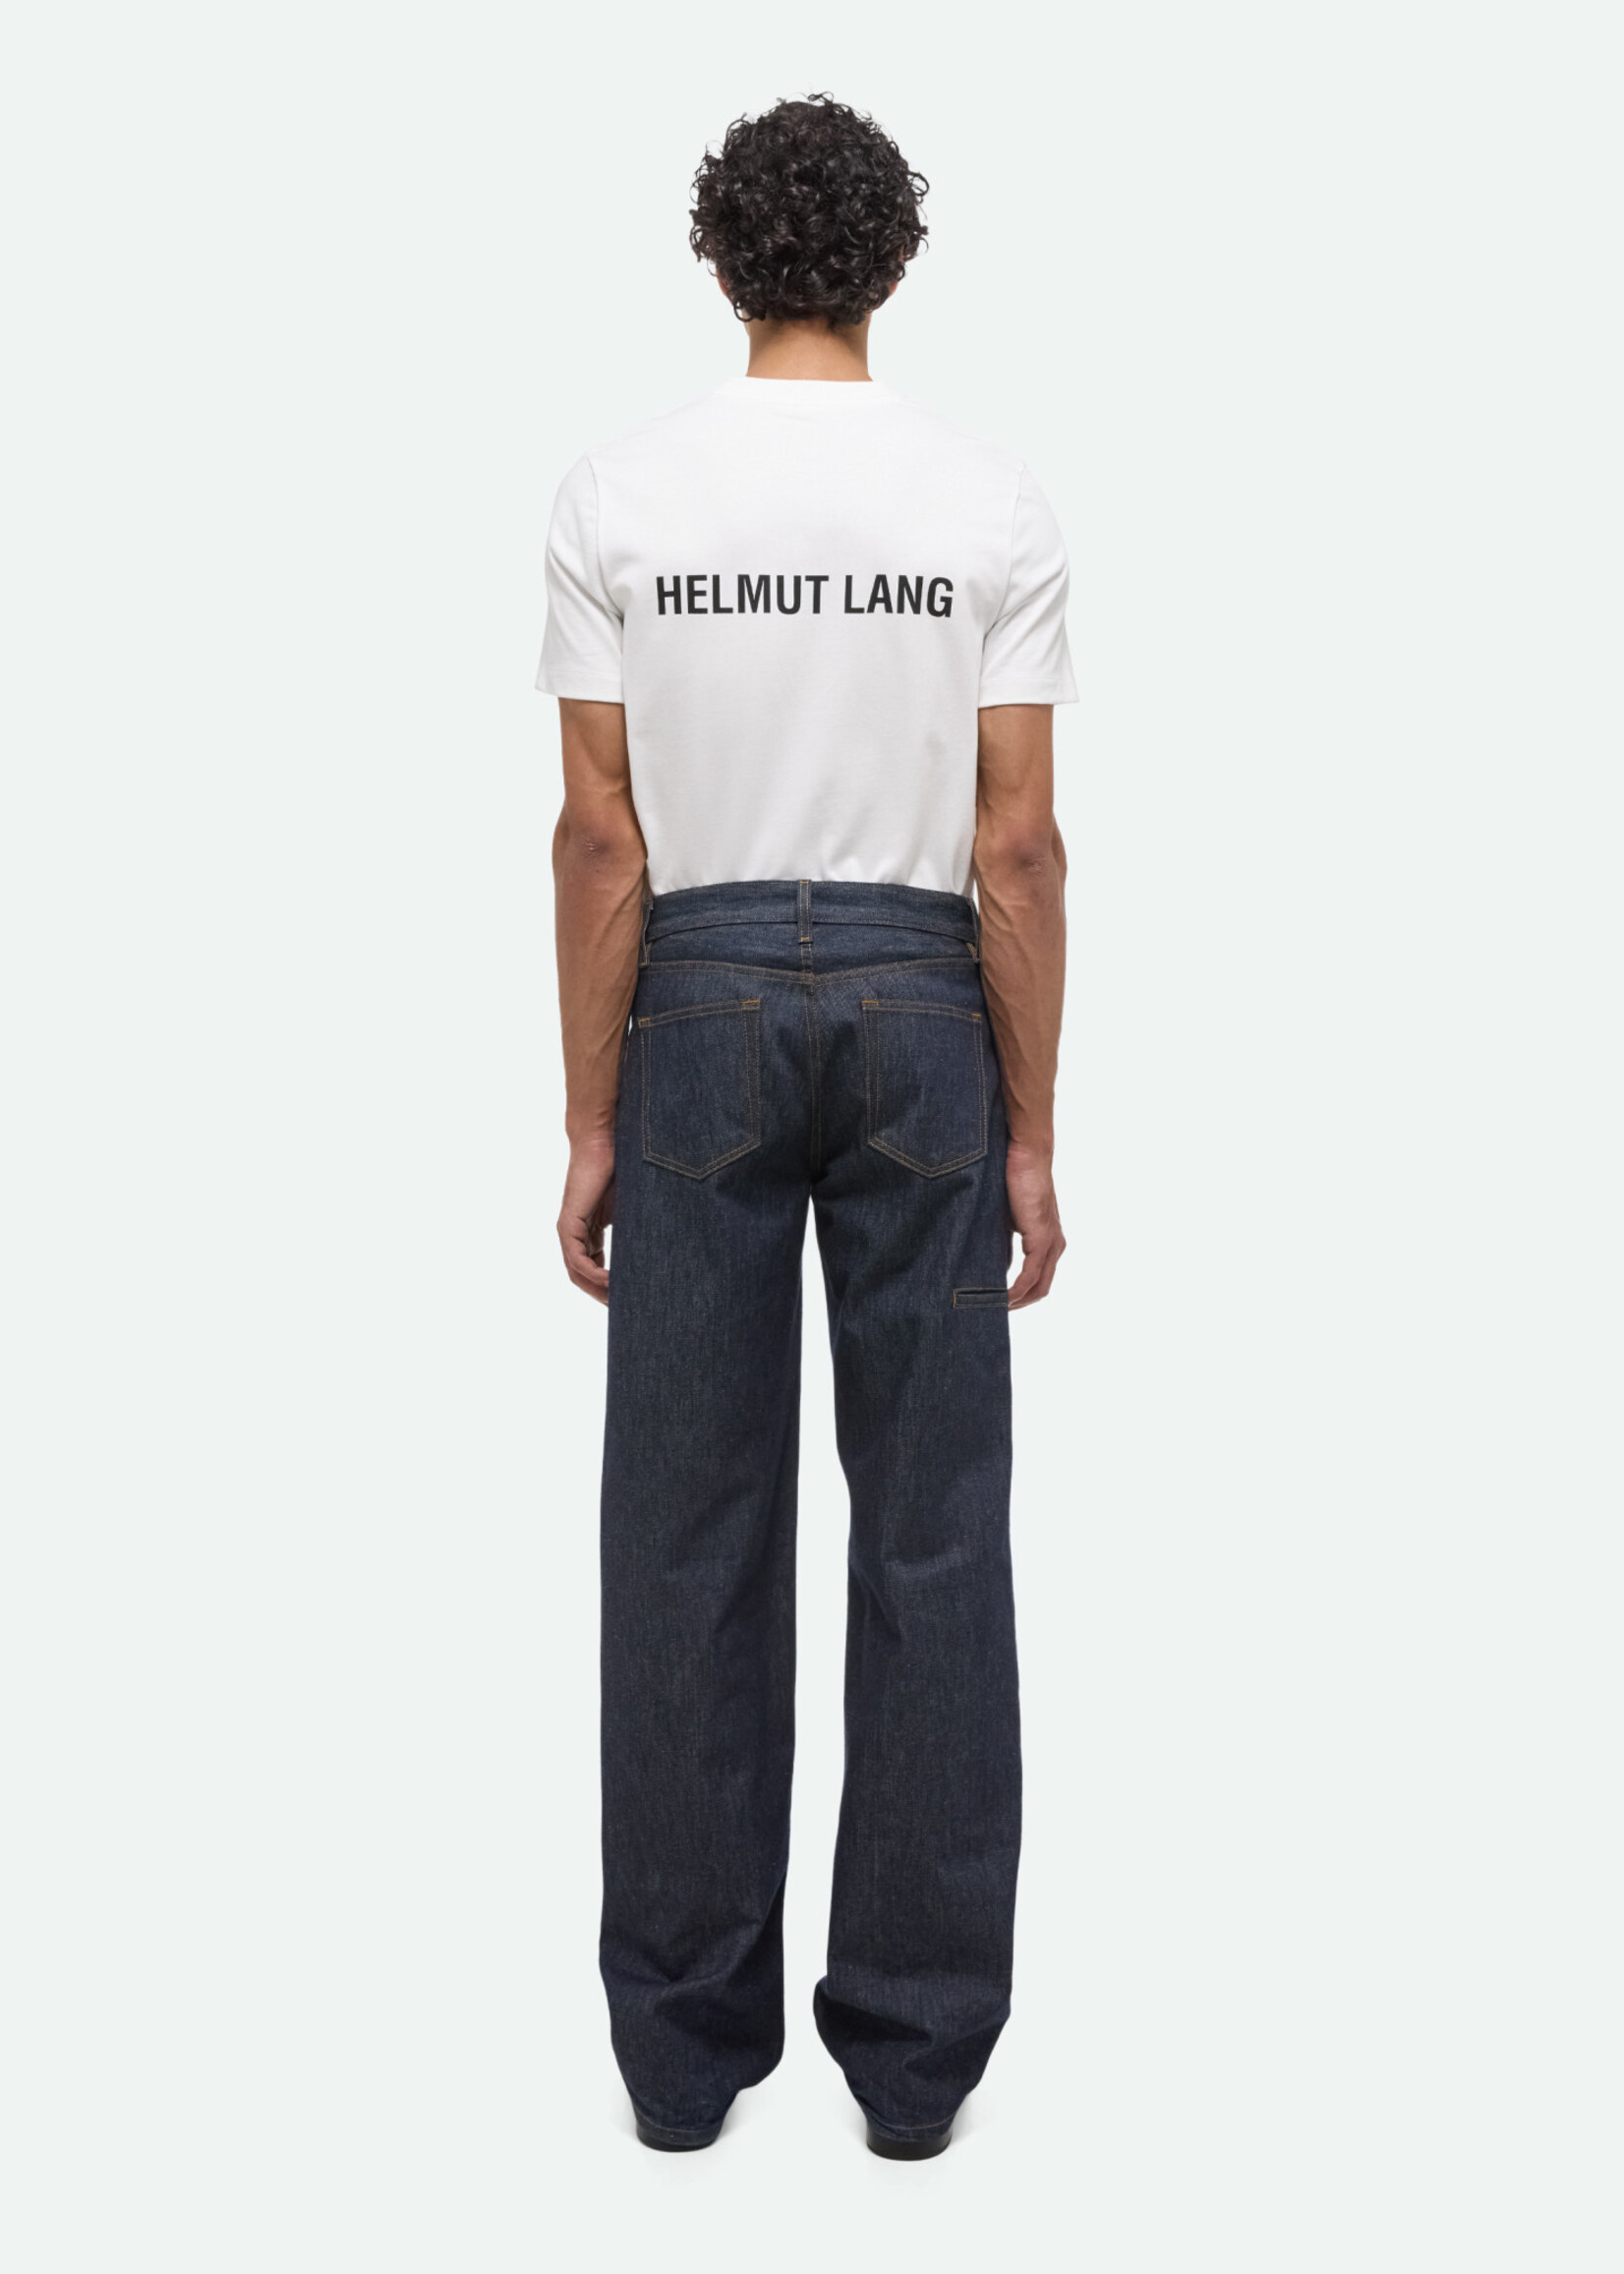 HELMUT LANG BY PETER DO Heavyweight Logo Tee in White